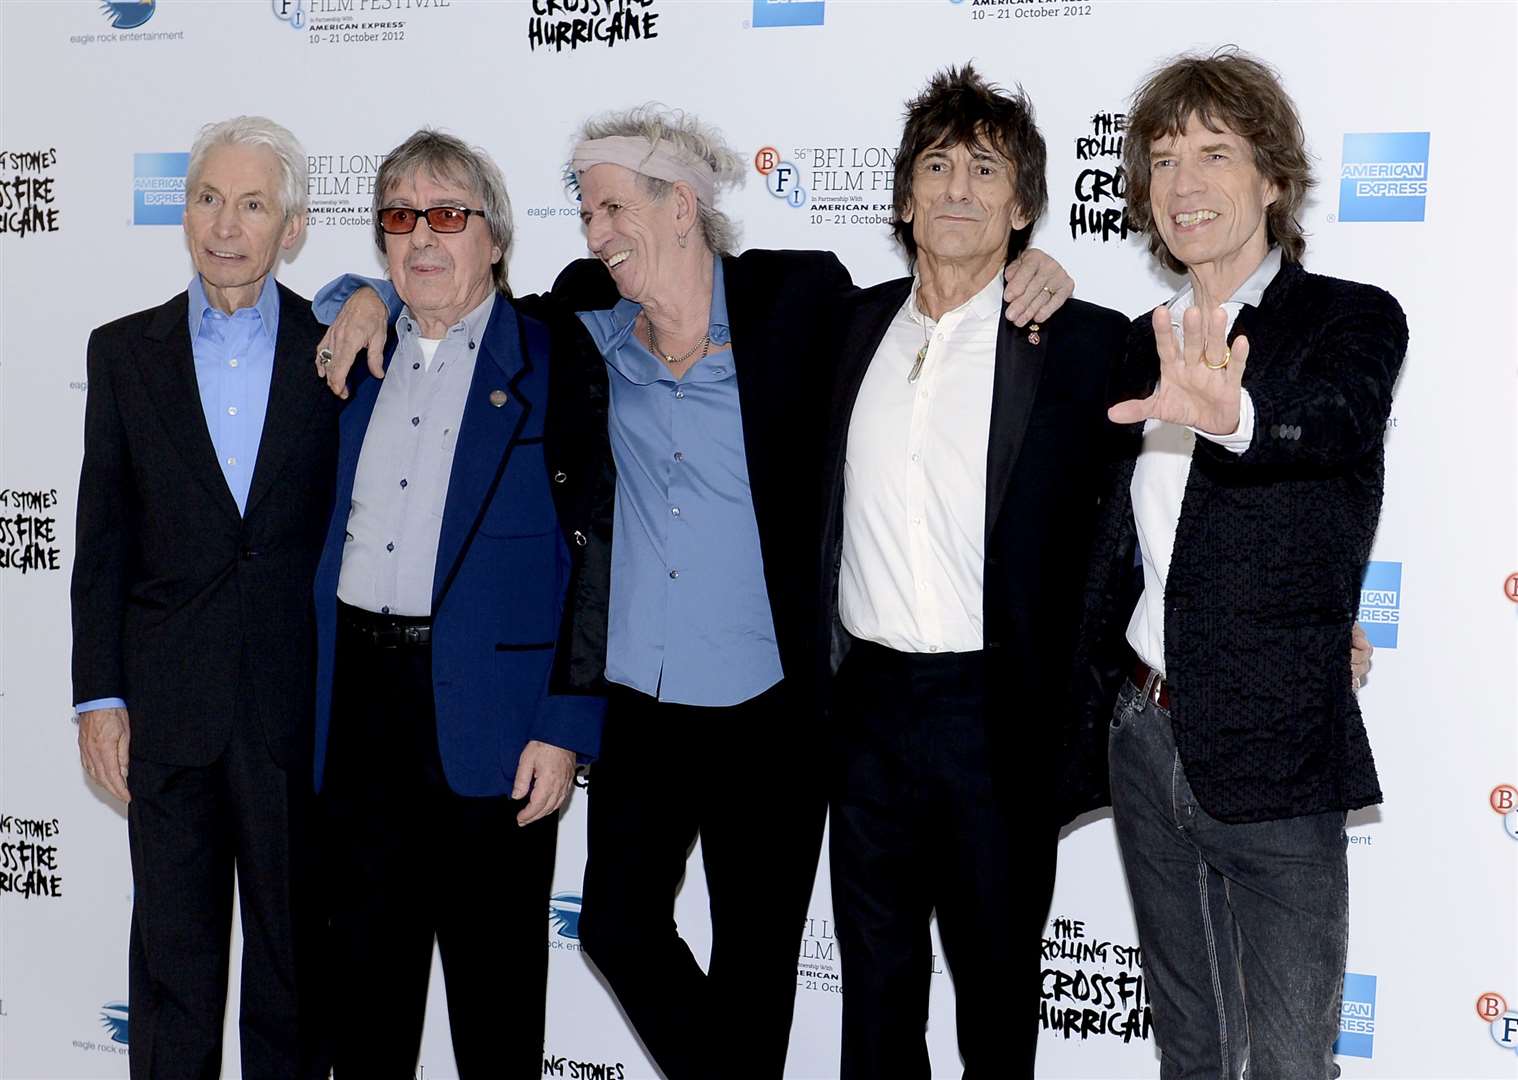 (Left to right) Charlie Watts, Bill Wyman, Keith Richards, Ronnie Wood and Mick Jagger. Watts, the long-time drummer of The Rolling Stones, has died (Jonathan Brady/PA)